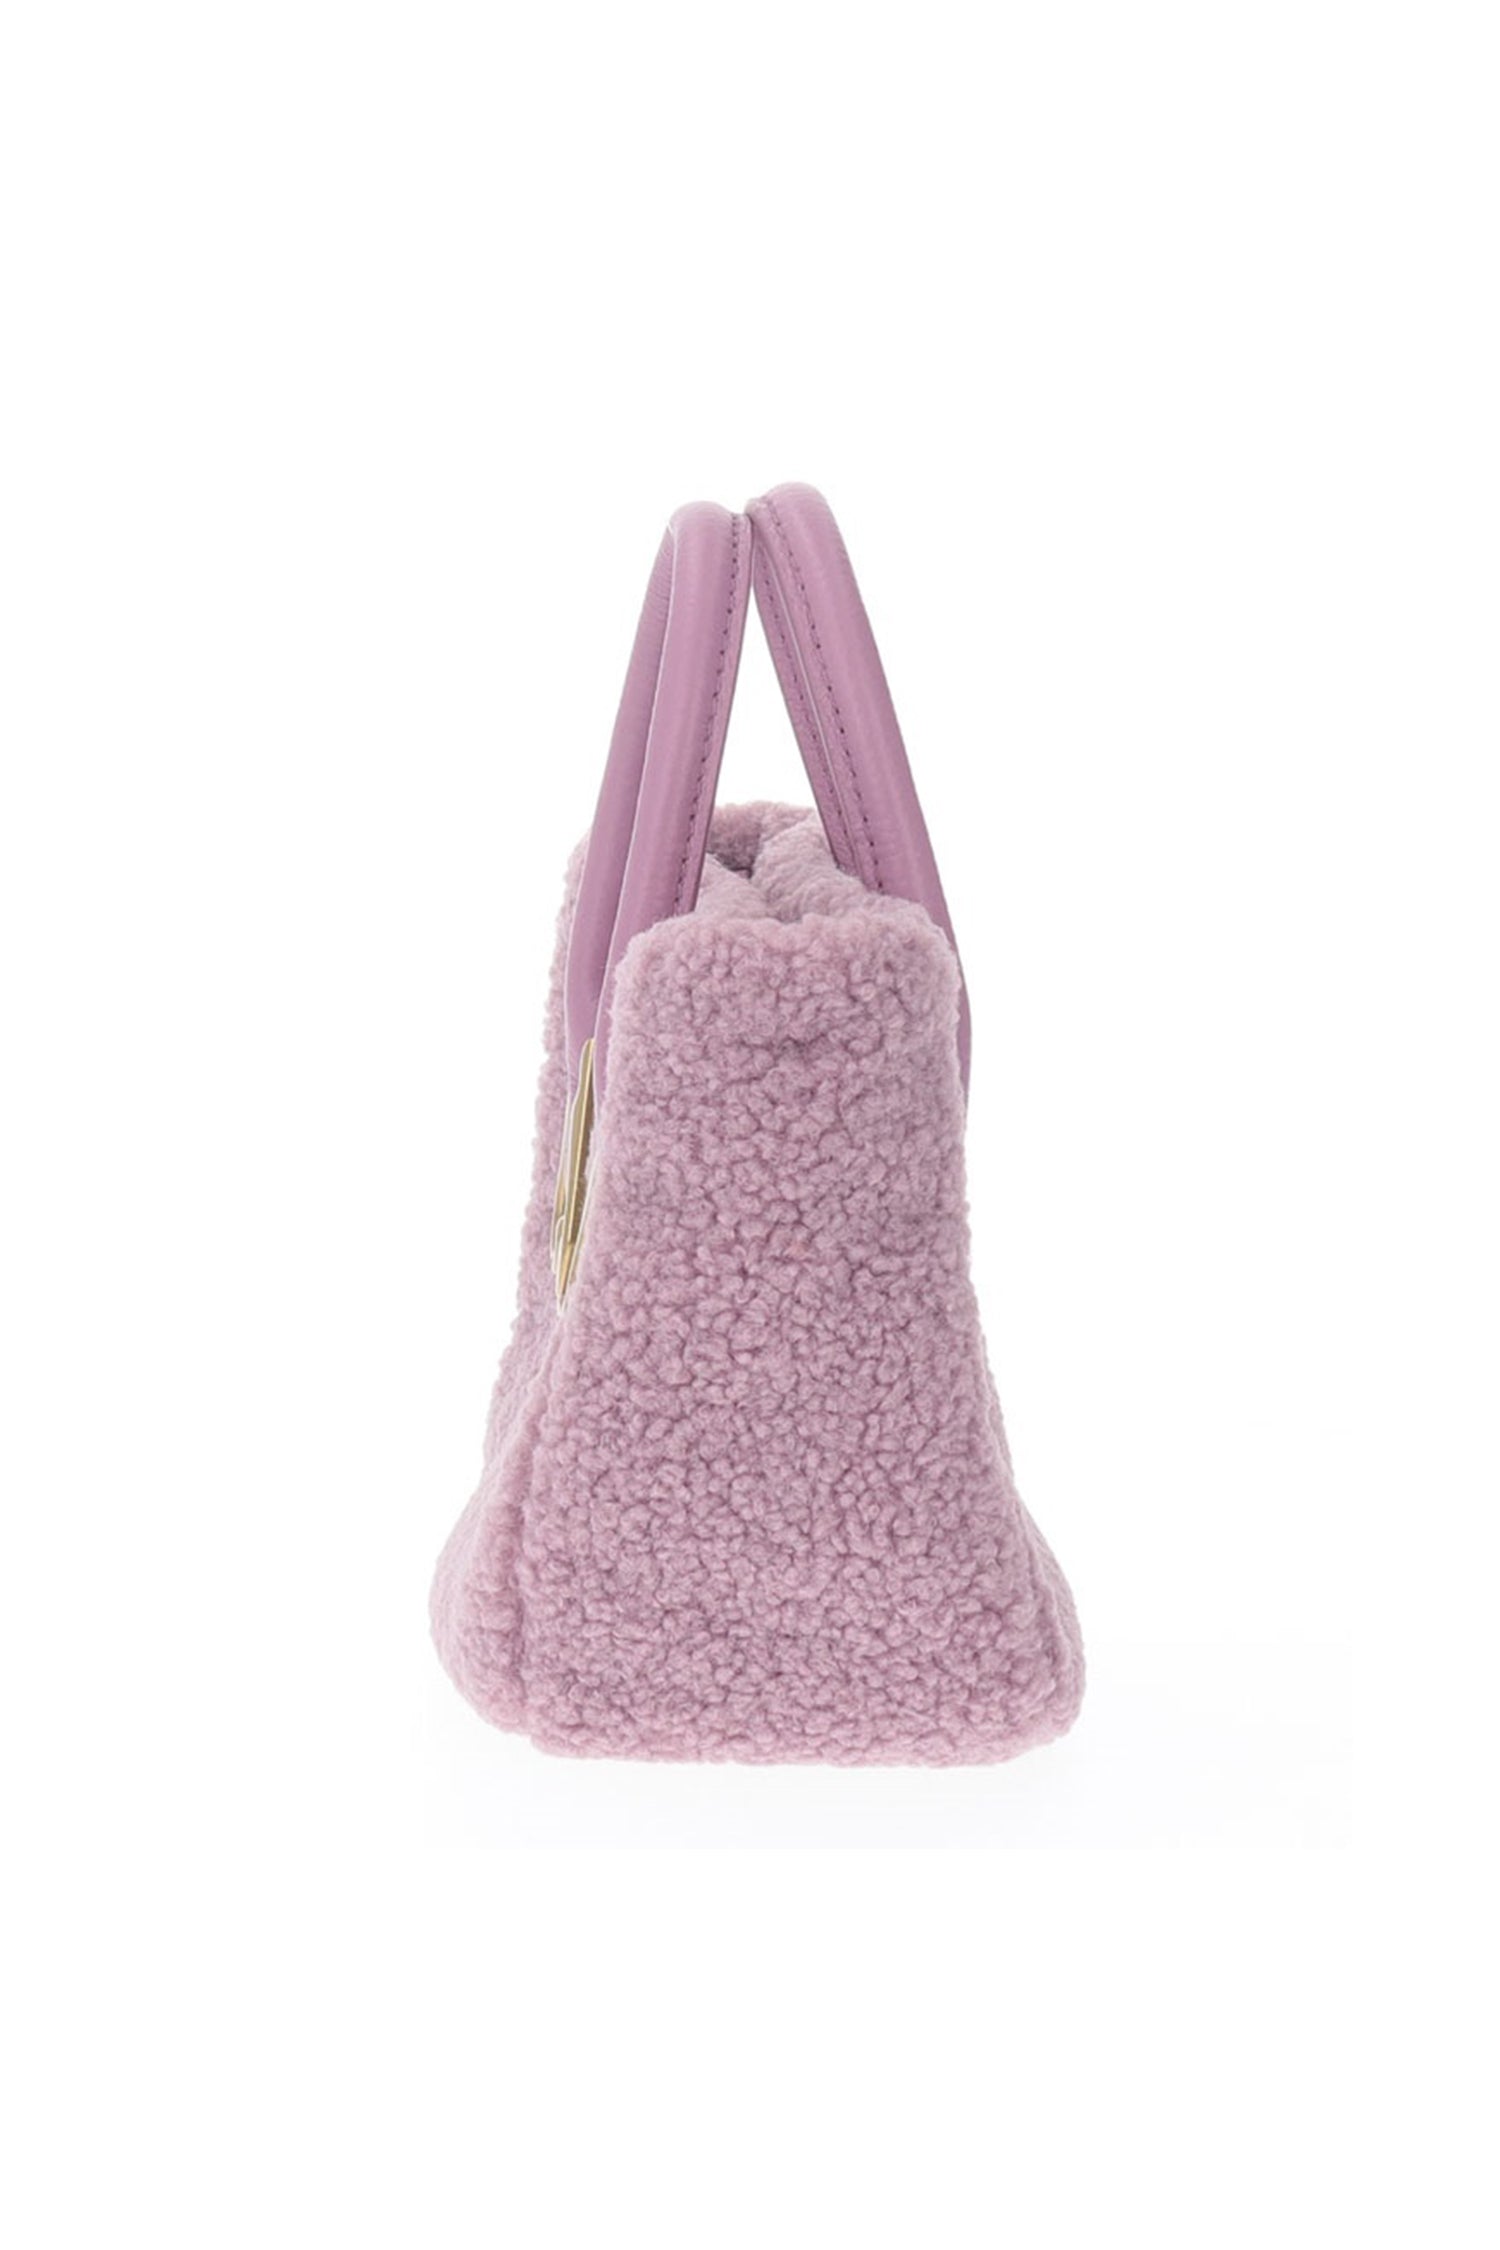 Lavender Teddy bag Lavender is large enough to carry even a laptop